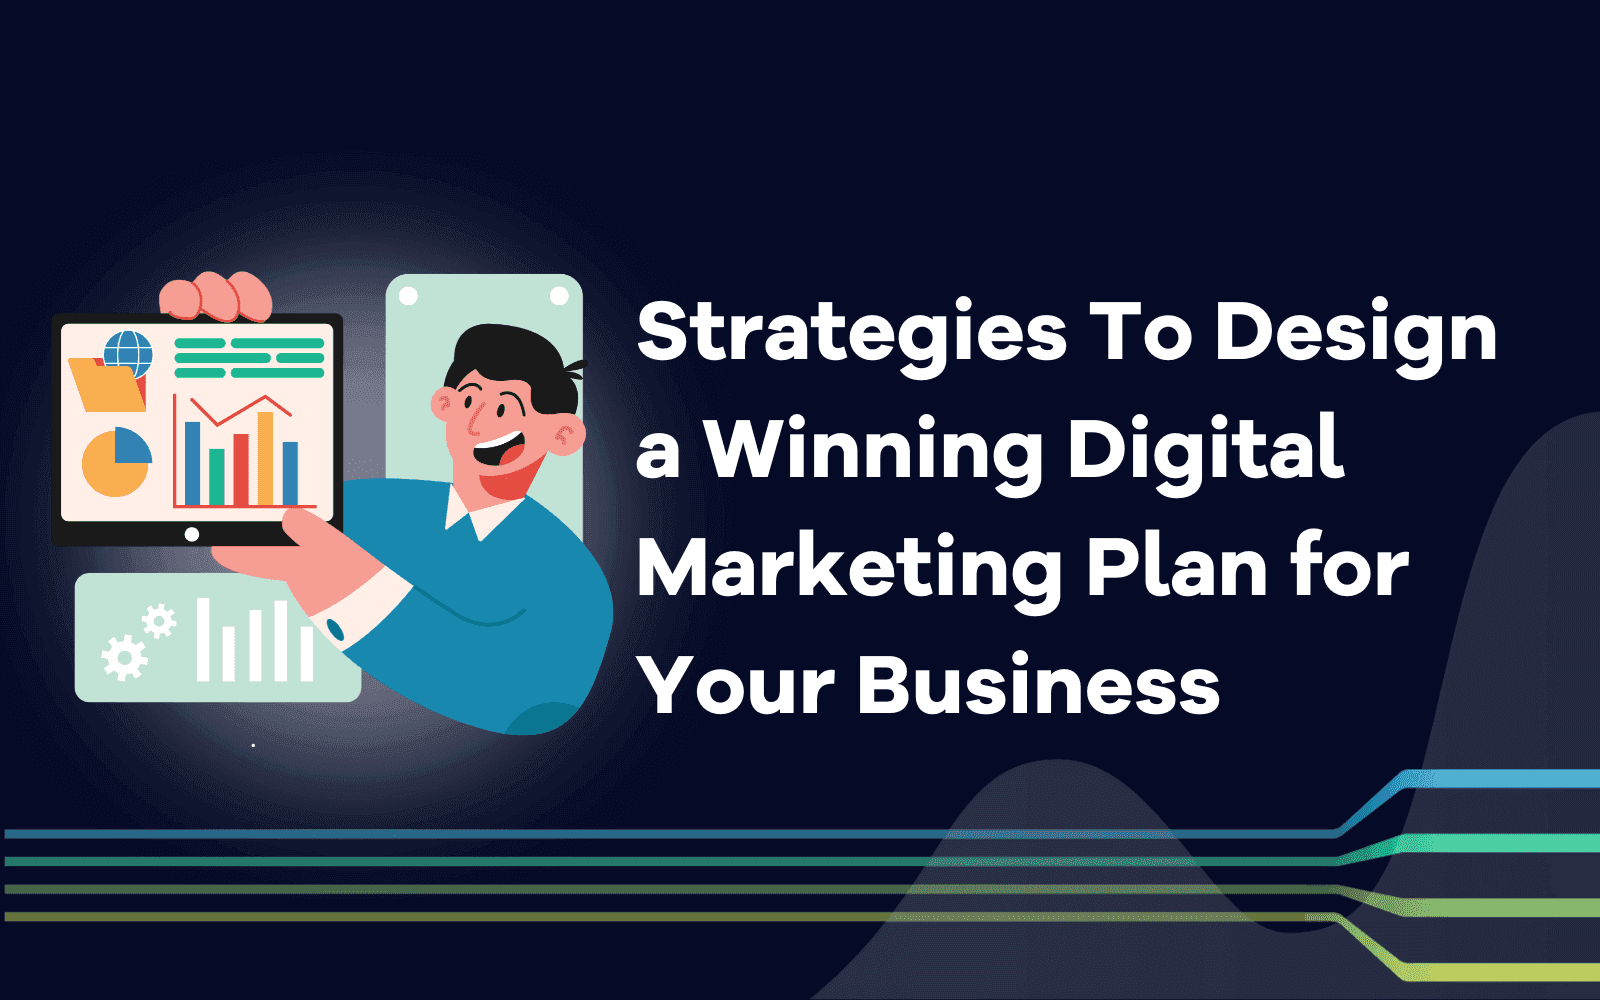 Strategies To Design a Winning Digital Marketing Plan for Your Business.png